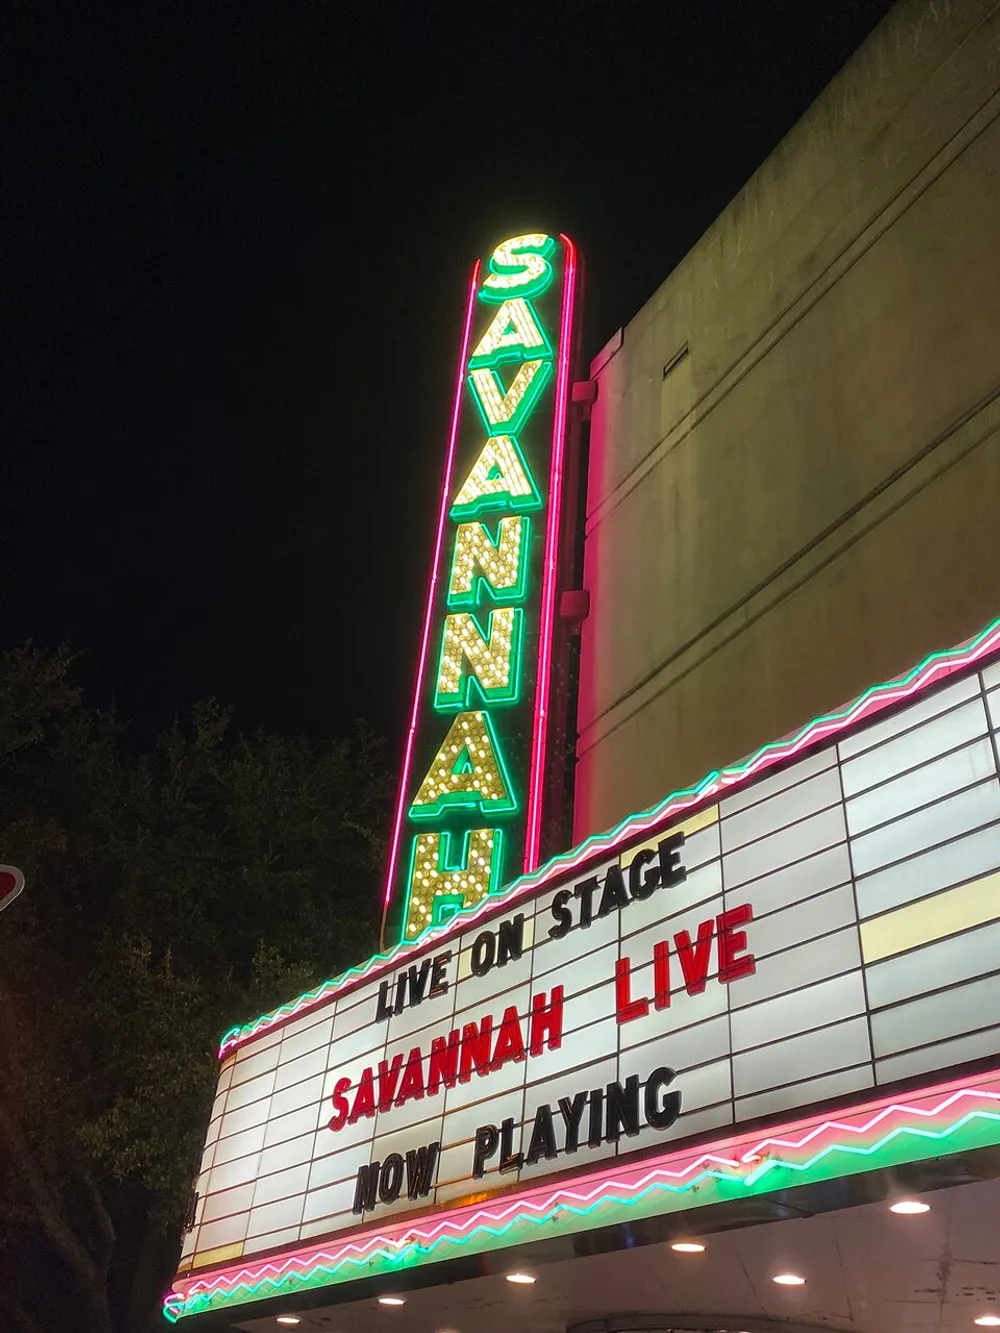 The image shows a brightly lit vertical neon sign spelling Savannah above a marquee that reads LIVE ON STAGE - SAVANNAH LIVE - NOW PLAYING against a night sky